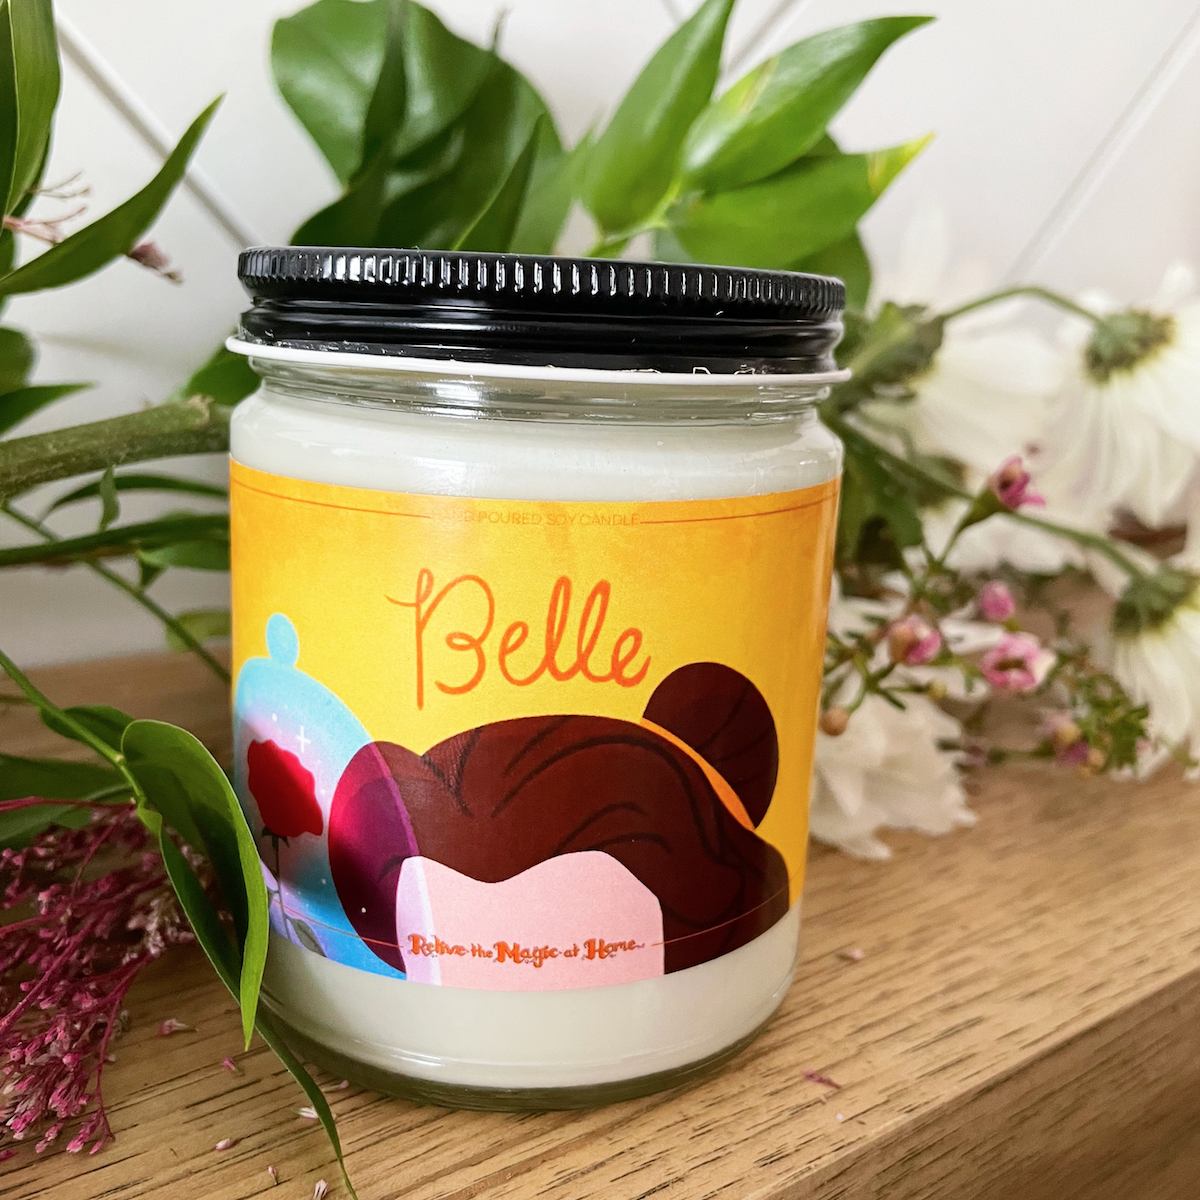 Belle Candle | Enchanted Rose Garden Scent | Soy Wax